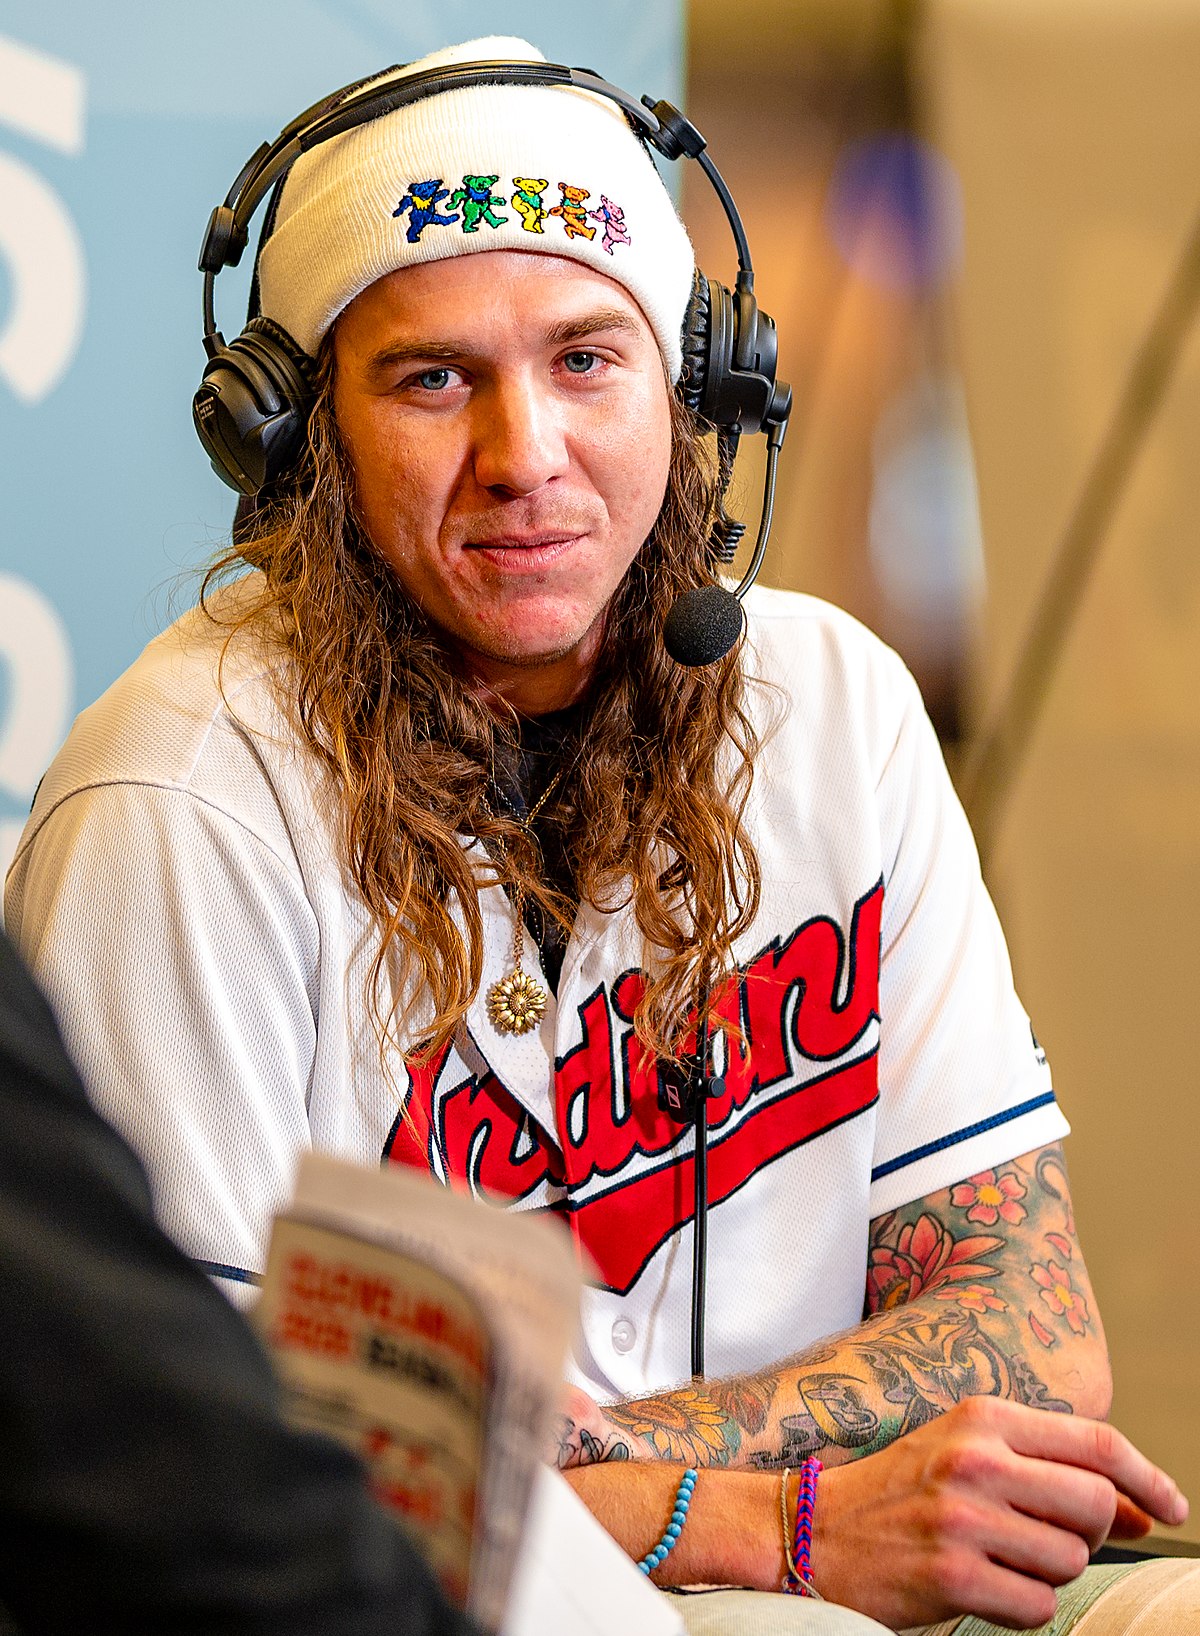 File:Mike Clevinger (49489155047) (cropped).jpg - Wikipedia